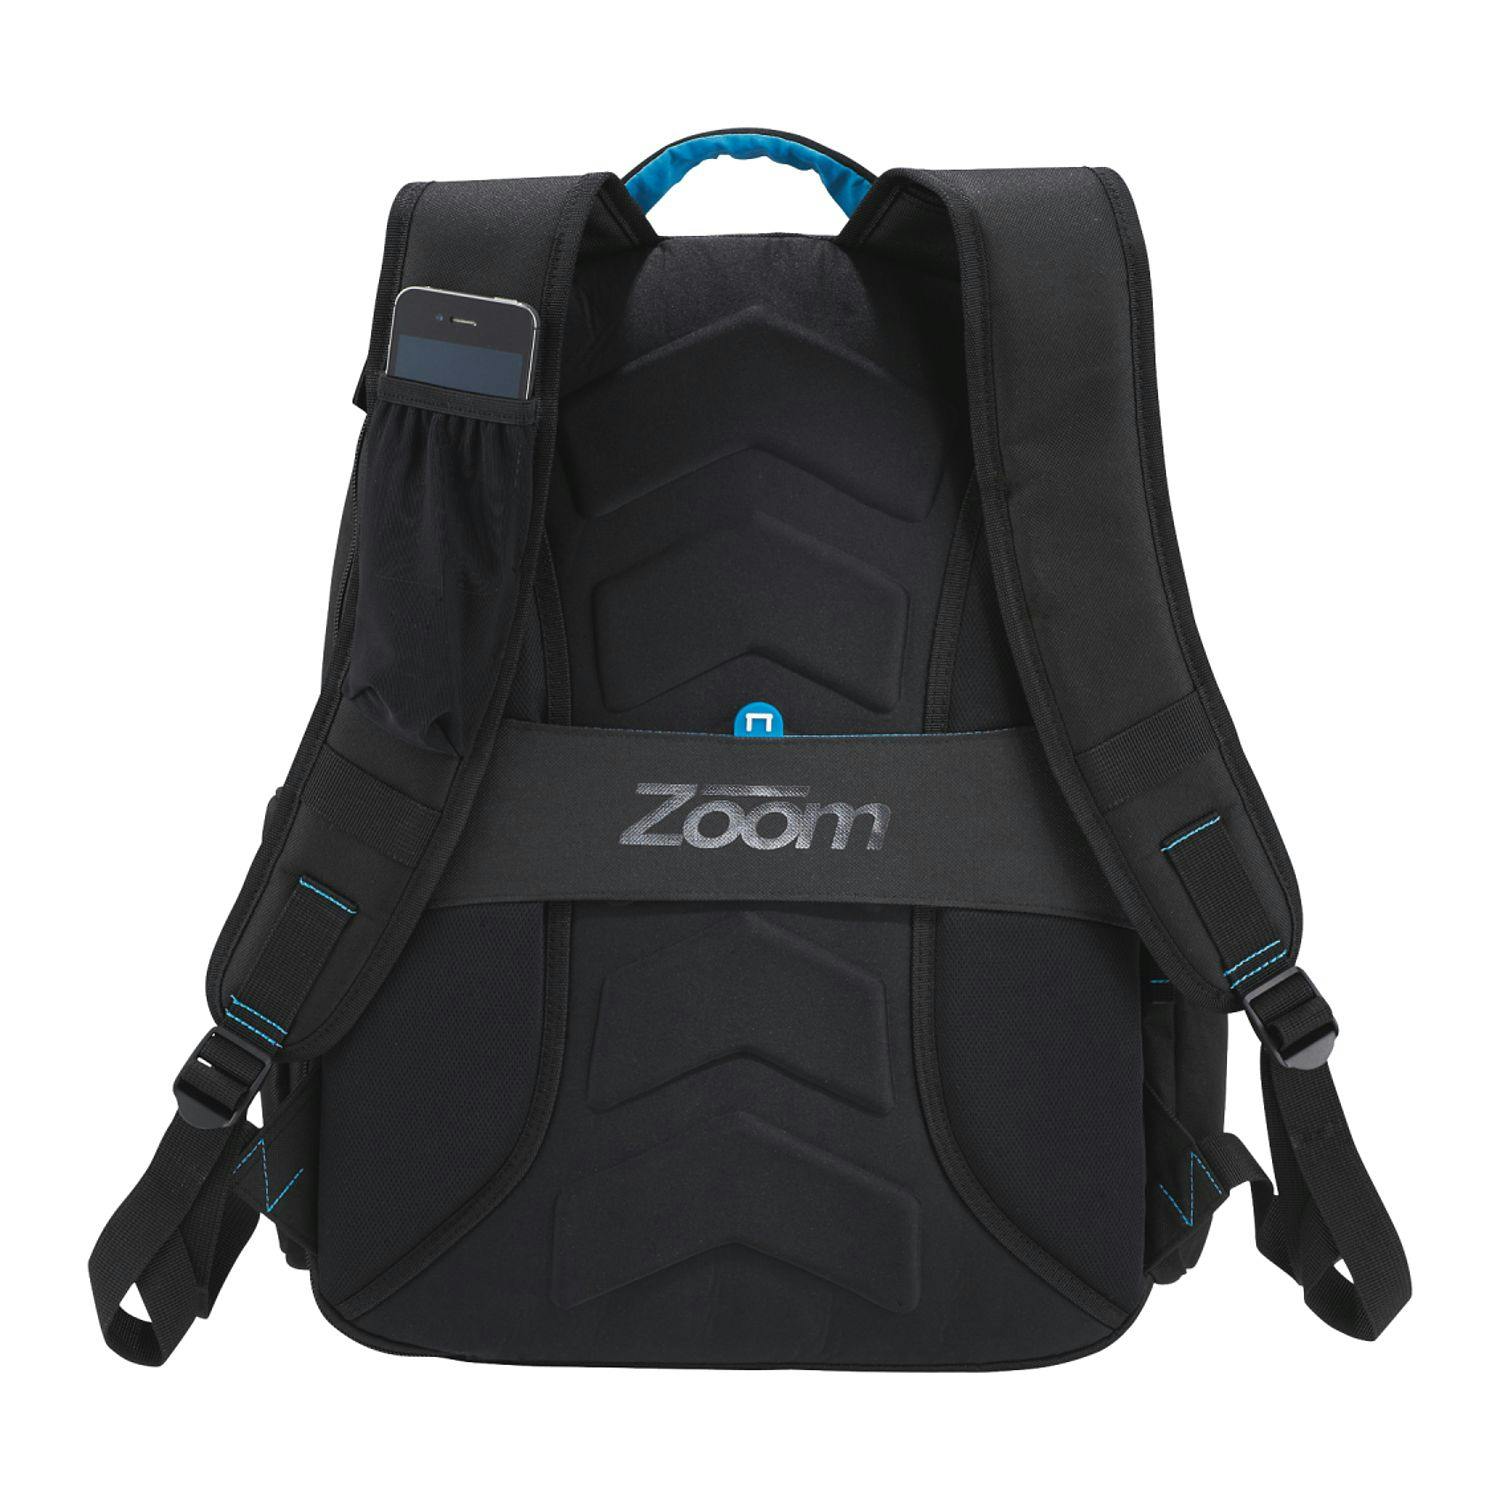 Zoom DayTripper 15" Computer Backpack - additional Image 2